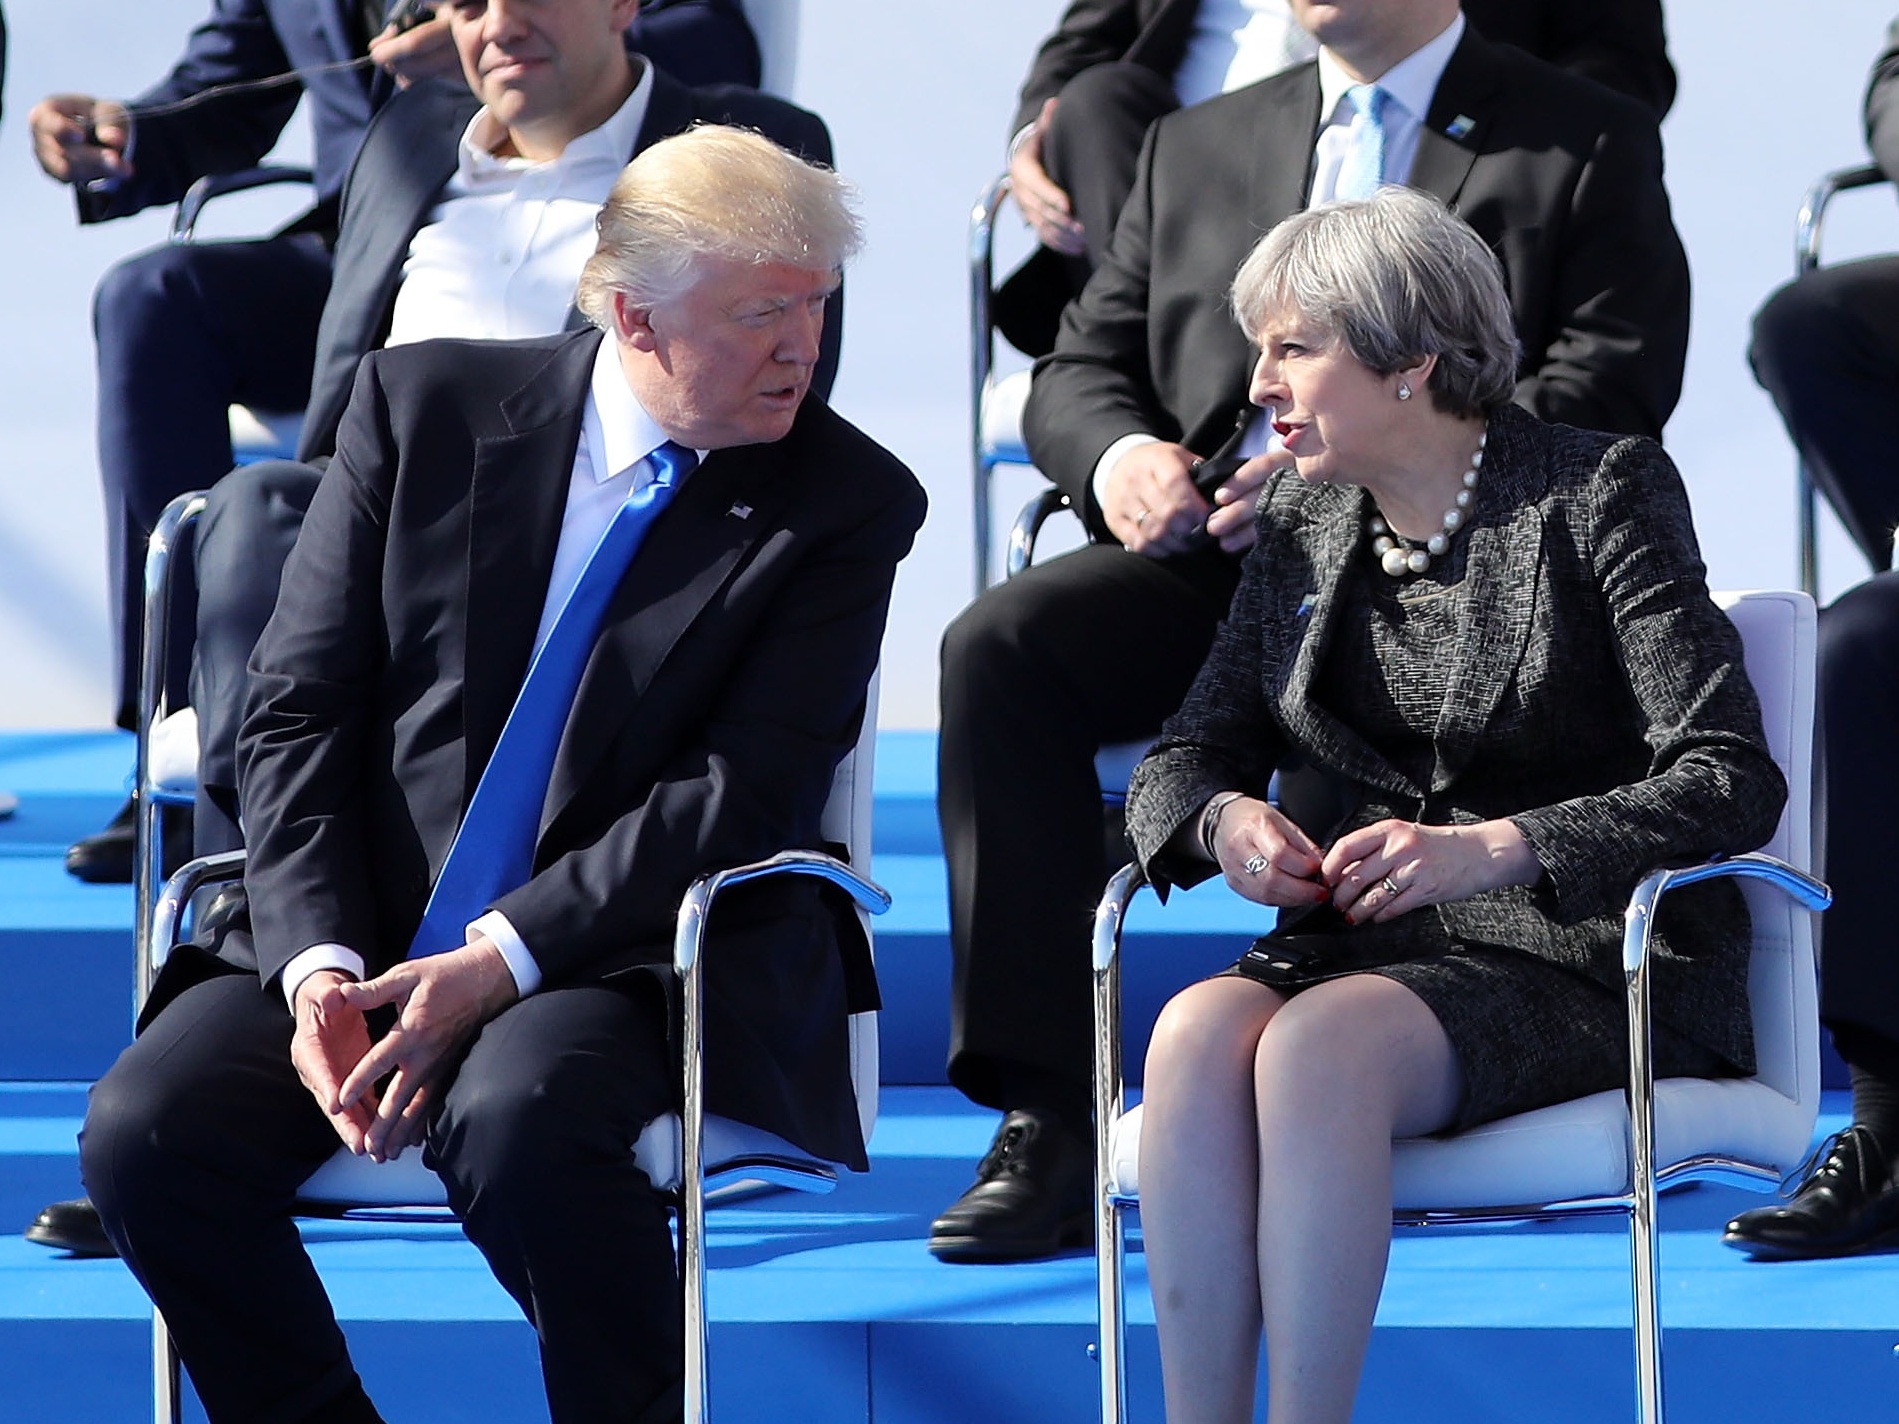 Donald Trump and Theresa May were seated together at the Nato summit in Brussels (Dan Kitwood/PA)